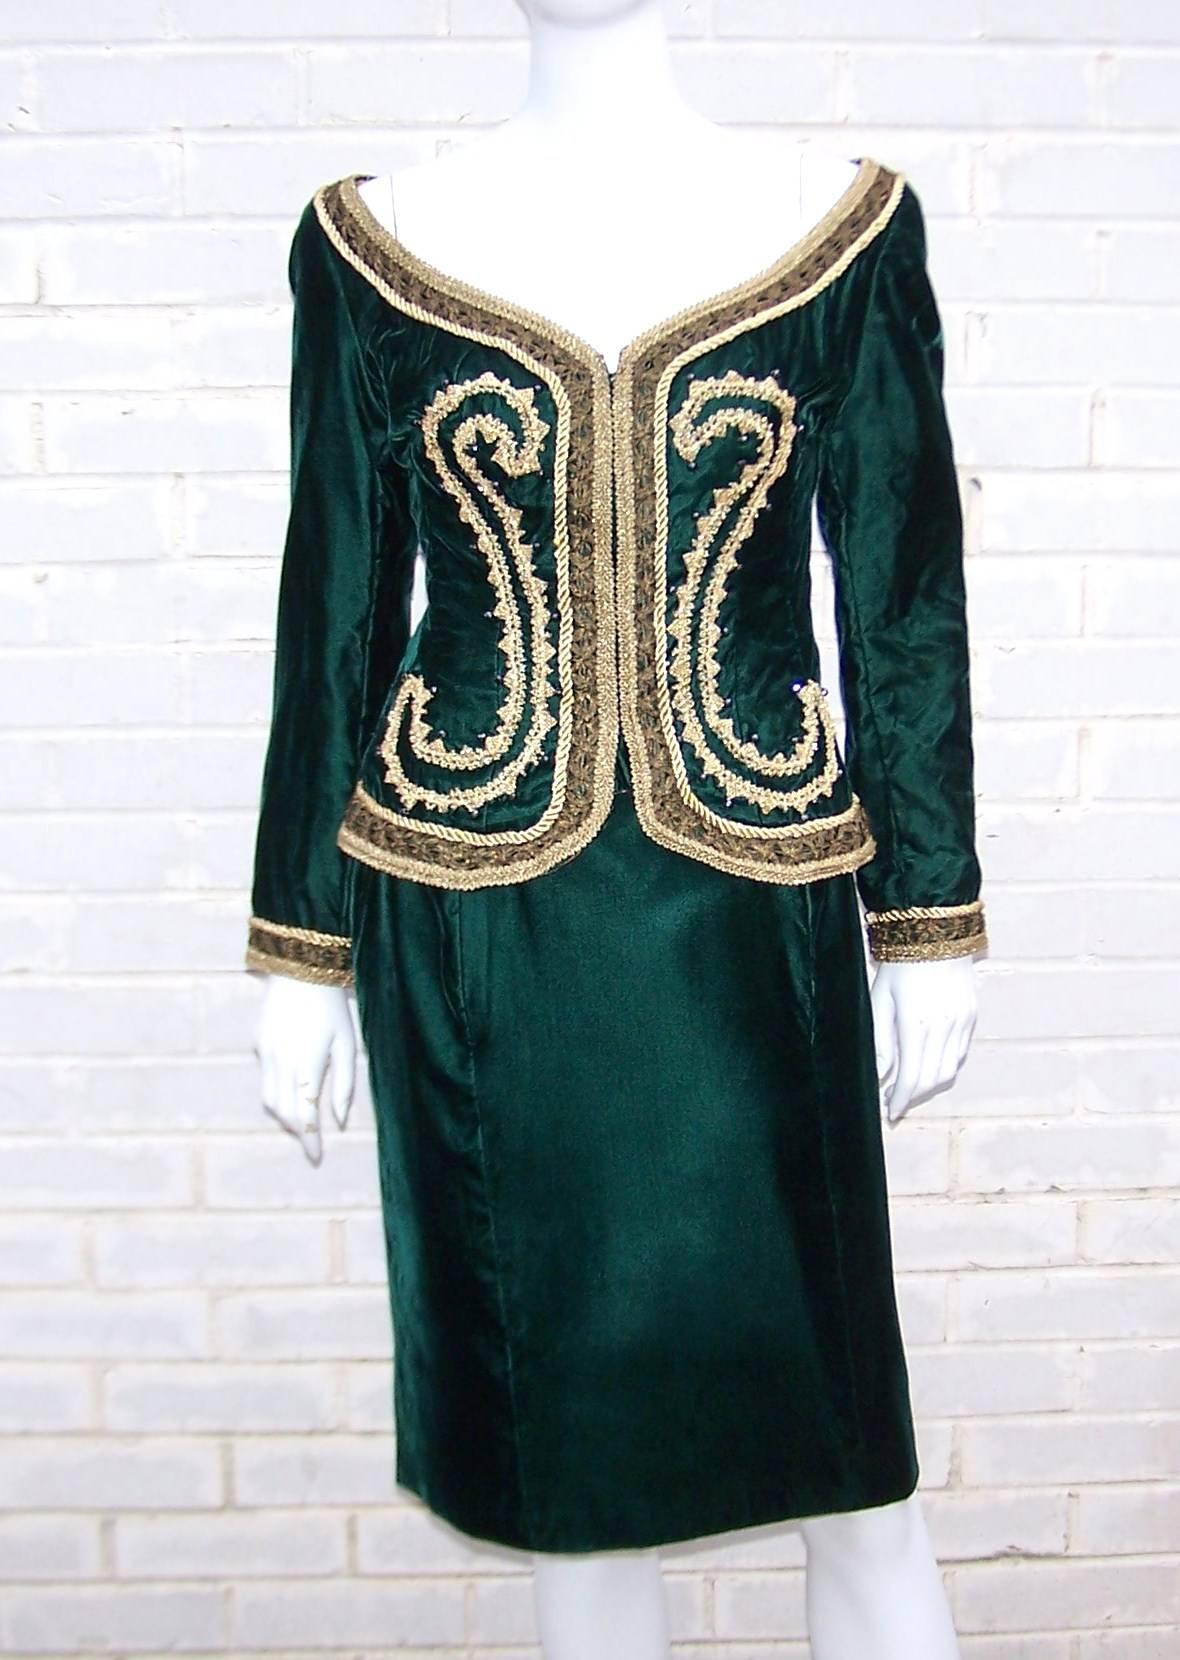 This 1980's skirt suit is reminiscent of luxe renaissance era clothing.  The heavily embellished off-shoulder jacket is trimmed in gold braiding with swirls of gold and black beading.  It hooks at the front with flesh tone satin lining, boning and